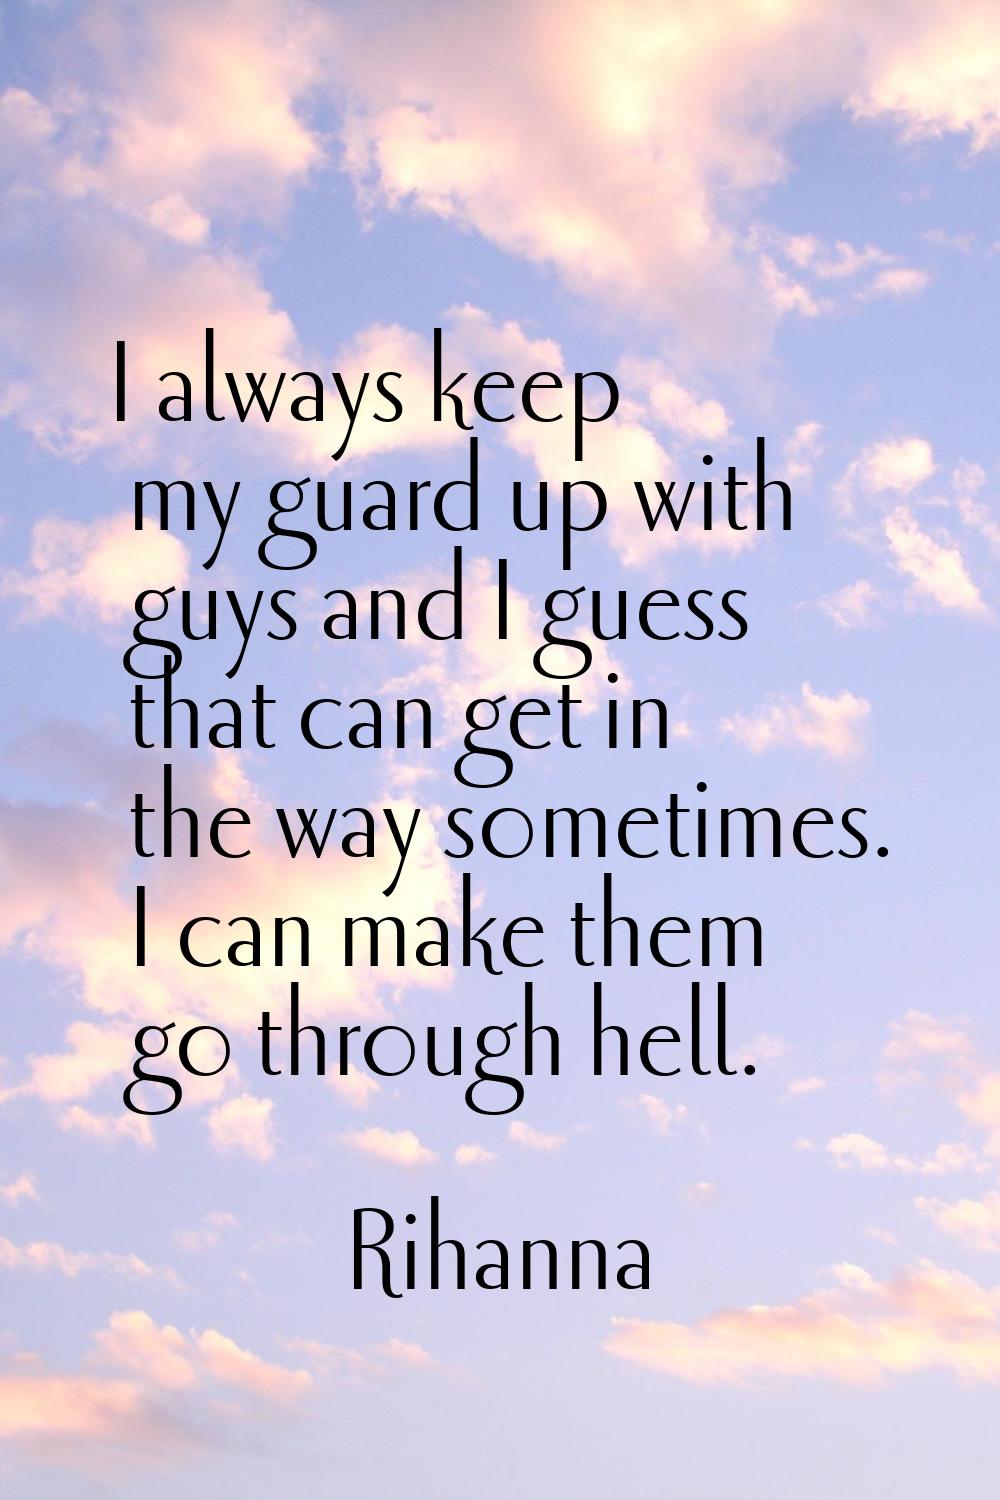 I always keep my guard up with guys and I guess that can get in the way sometimes. I can make them 